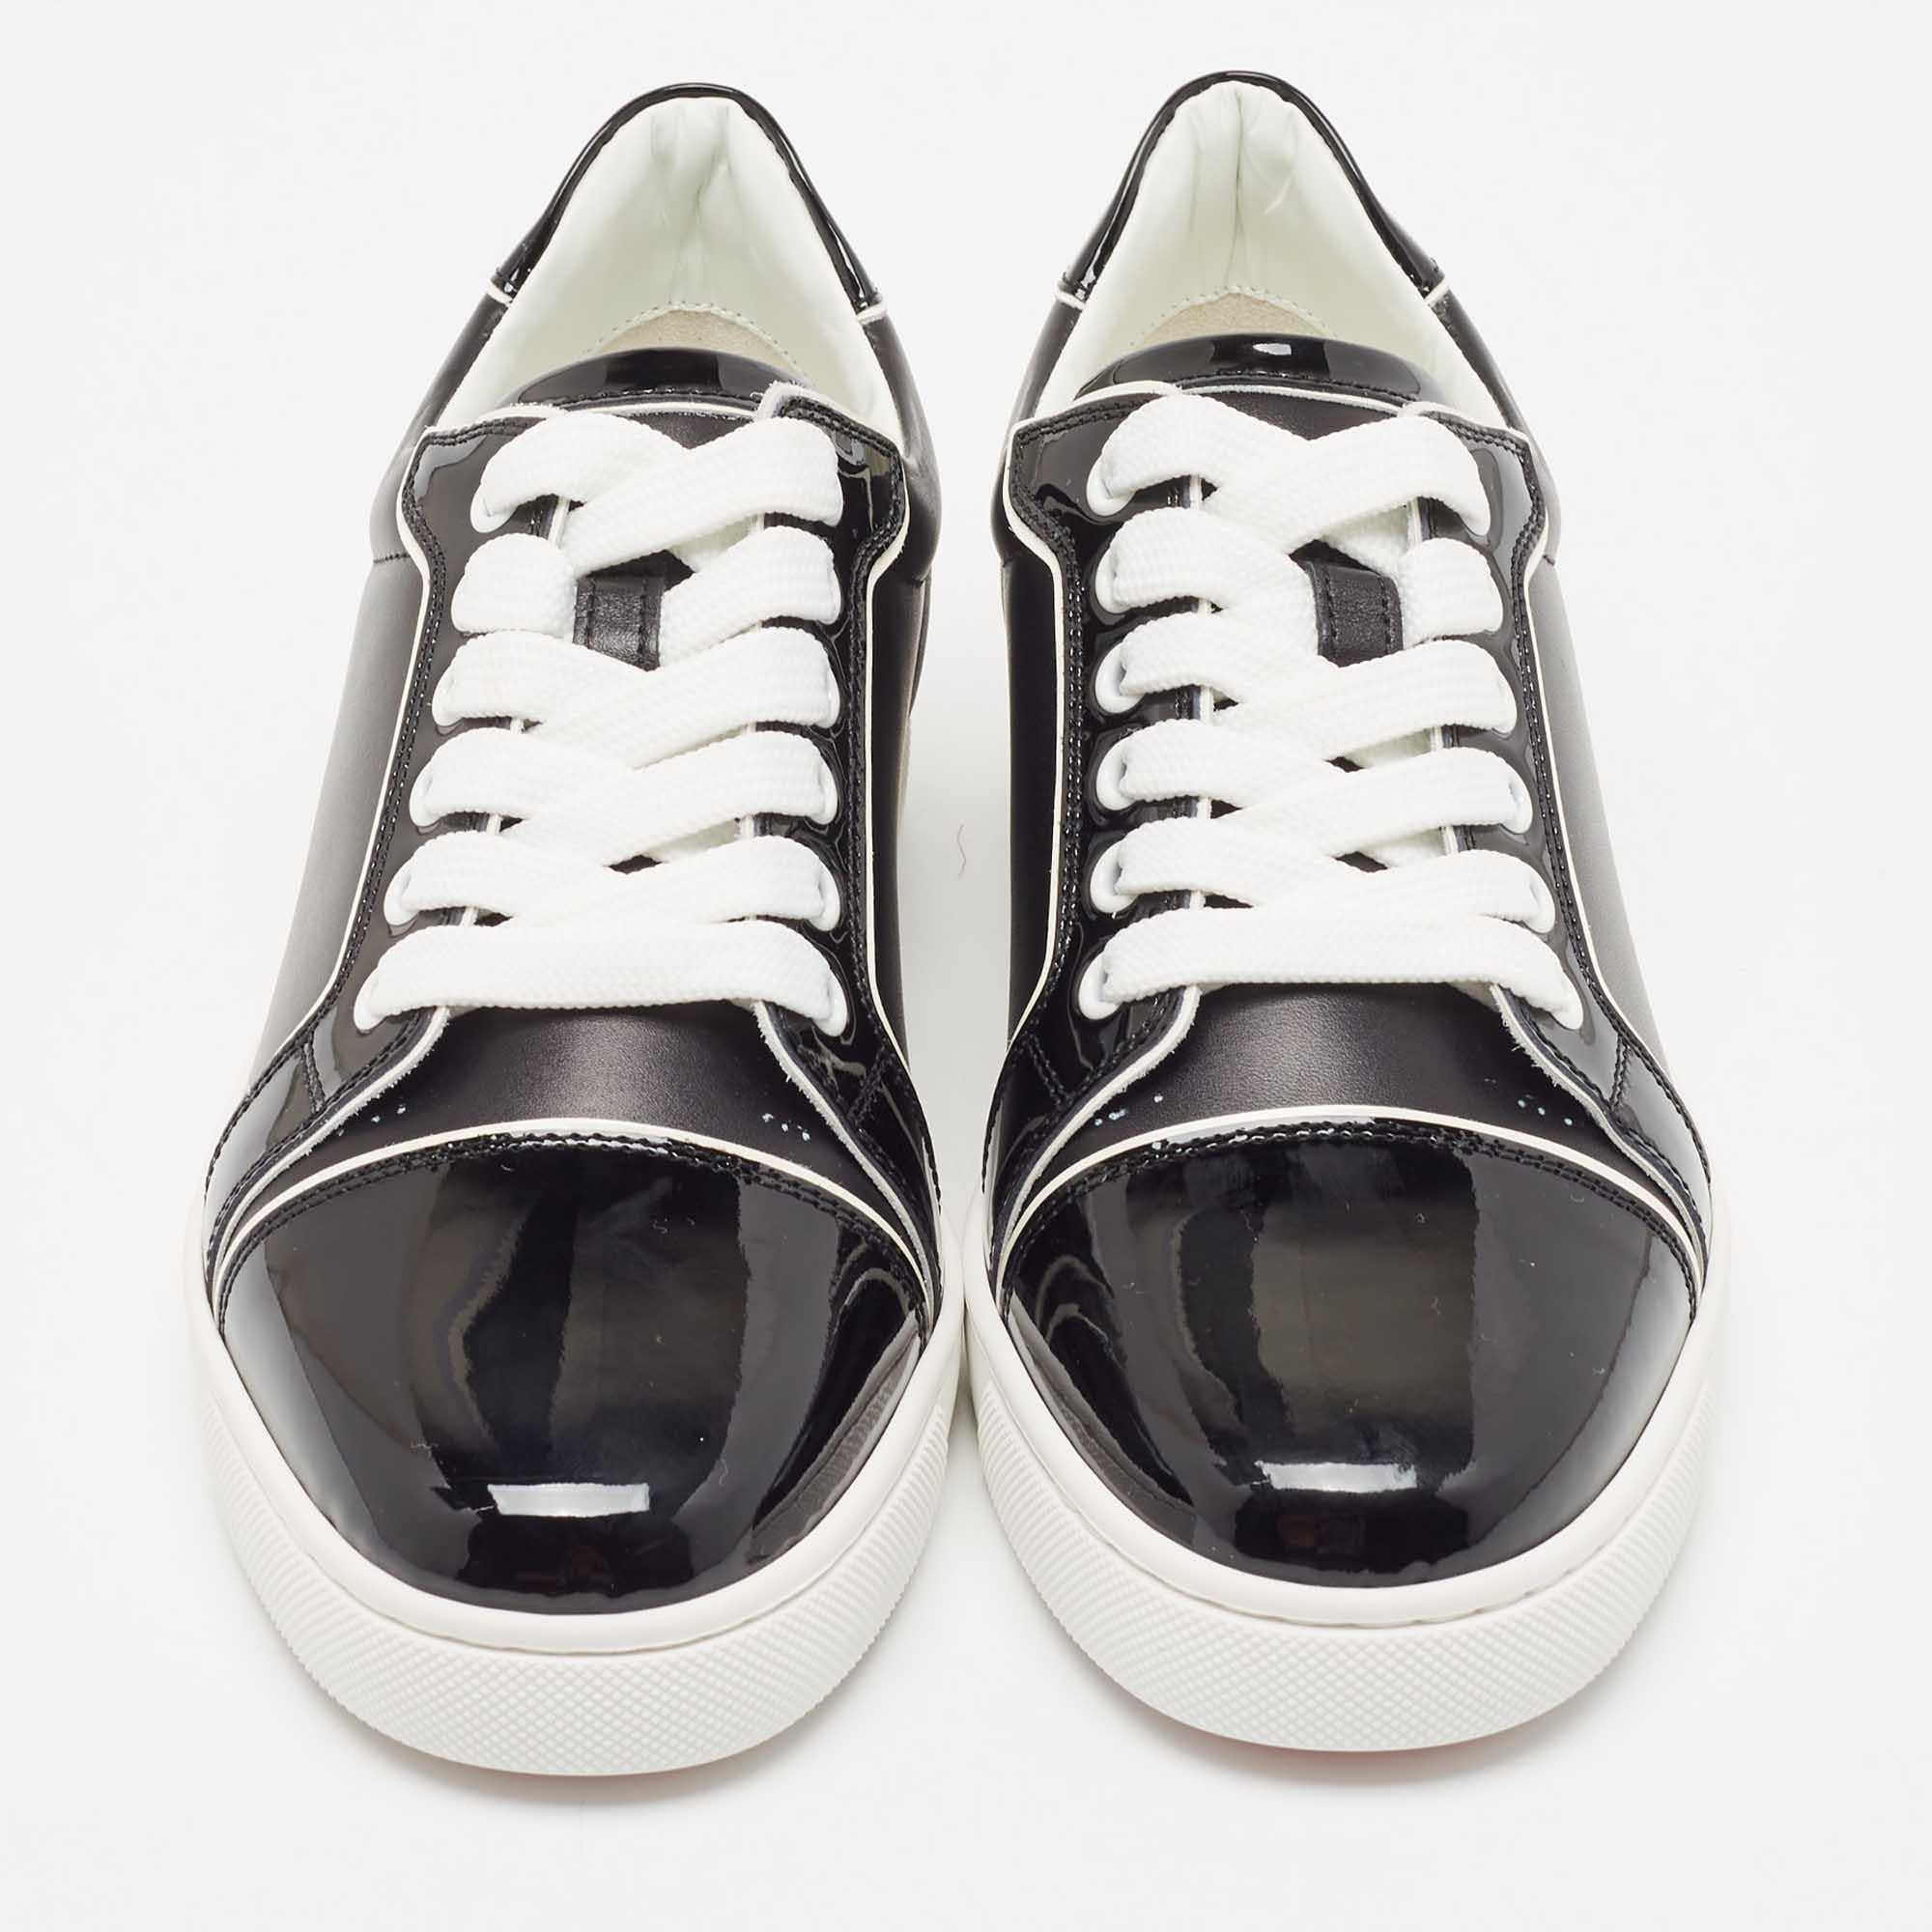 Christian Louboutin Black Patent and Leather Low Top Sneakers Size 36 In New Condition For Sale In Dubai, Al Qouz 2